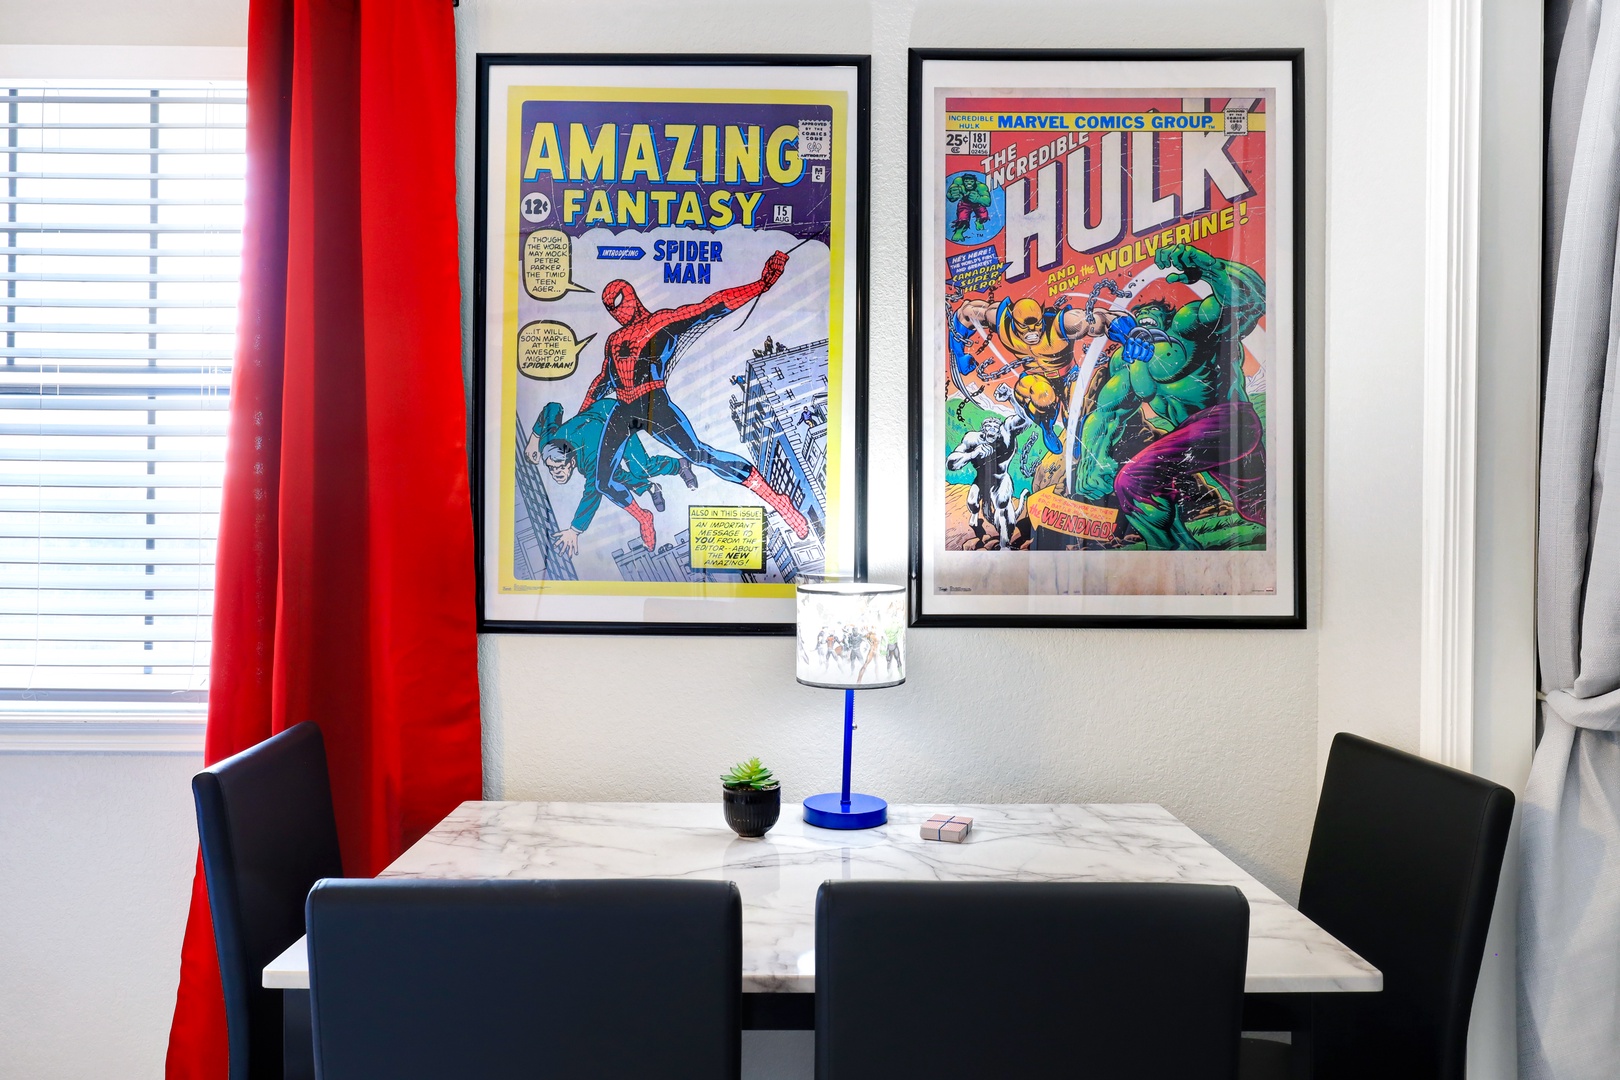 Off the Jack & Jill bath, the final king bedroom is ideal for comic book debates